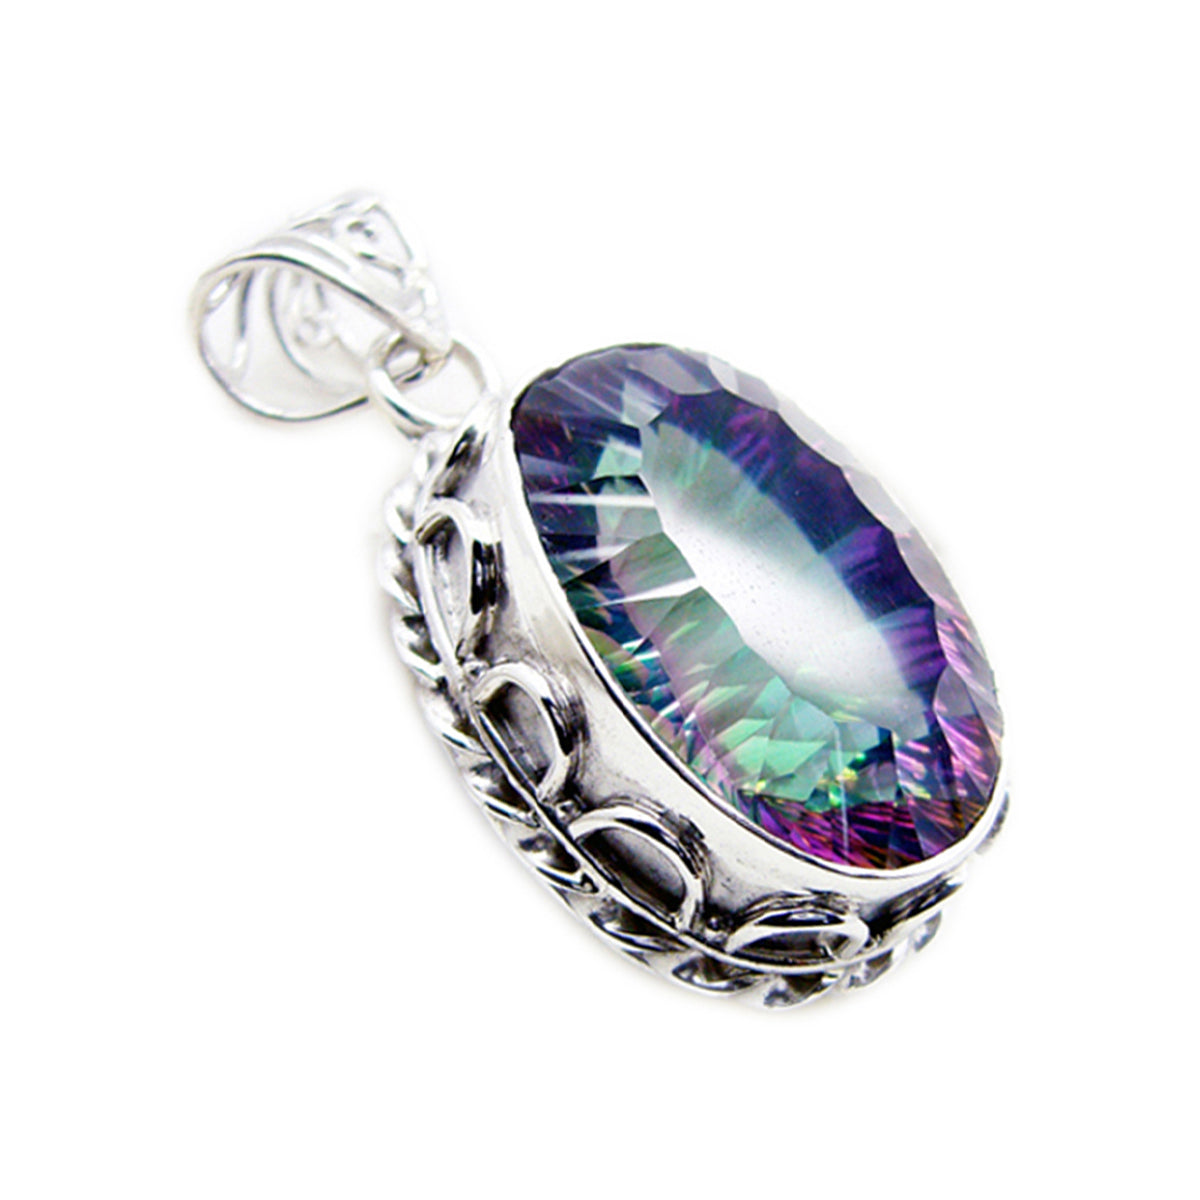 Riyo Exquisite Gemstone Oval Faceted Multi Color Mystic Quartz 1178 Sterling Silver Pendant Gift For Good Friday